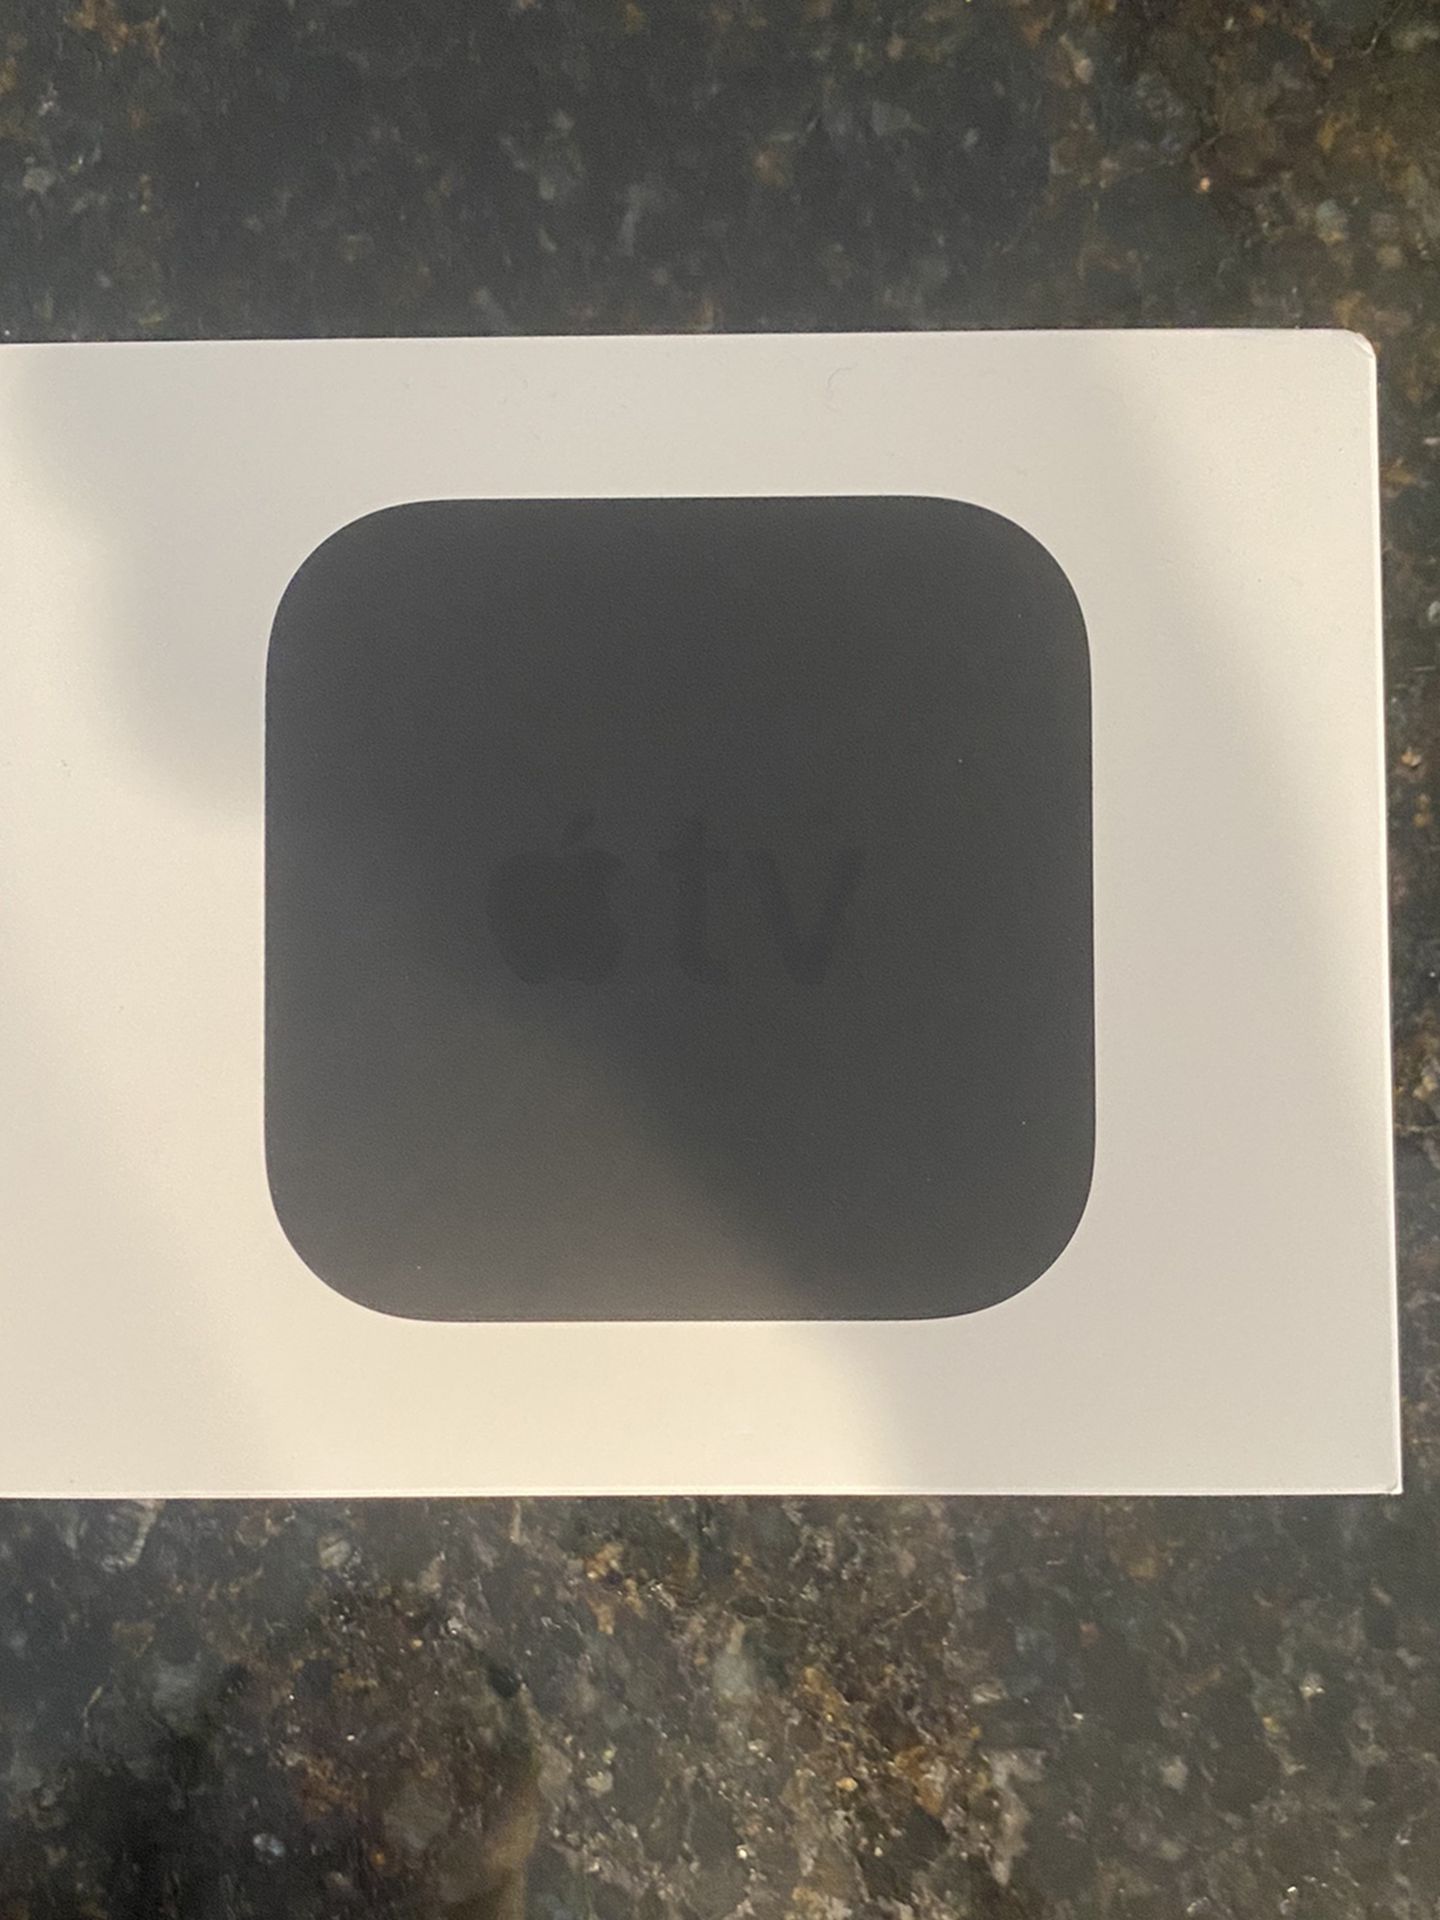 Apple TV 3rd Generation Media Streamer with Remote and Cable (A1469)